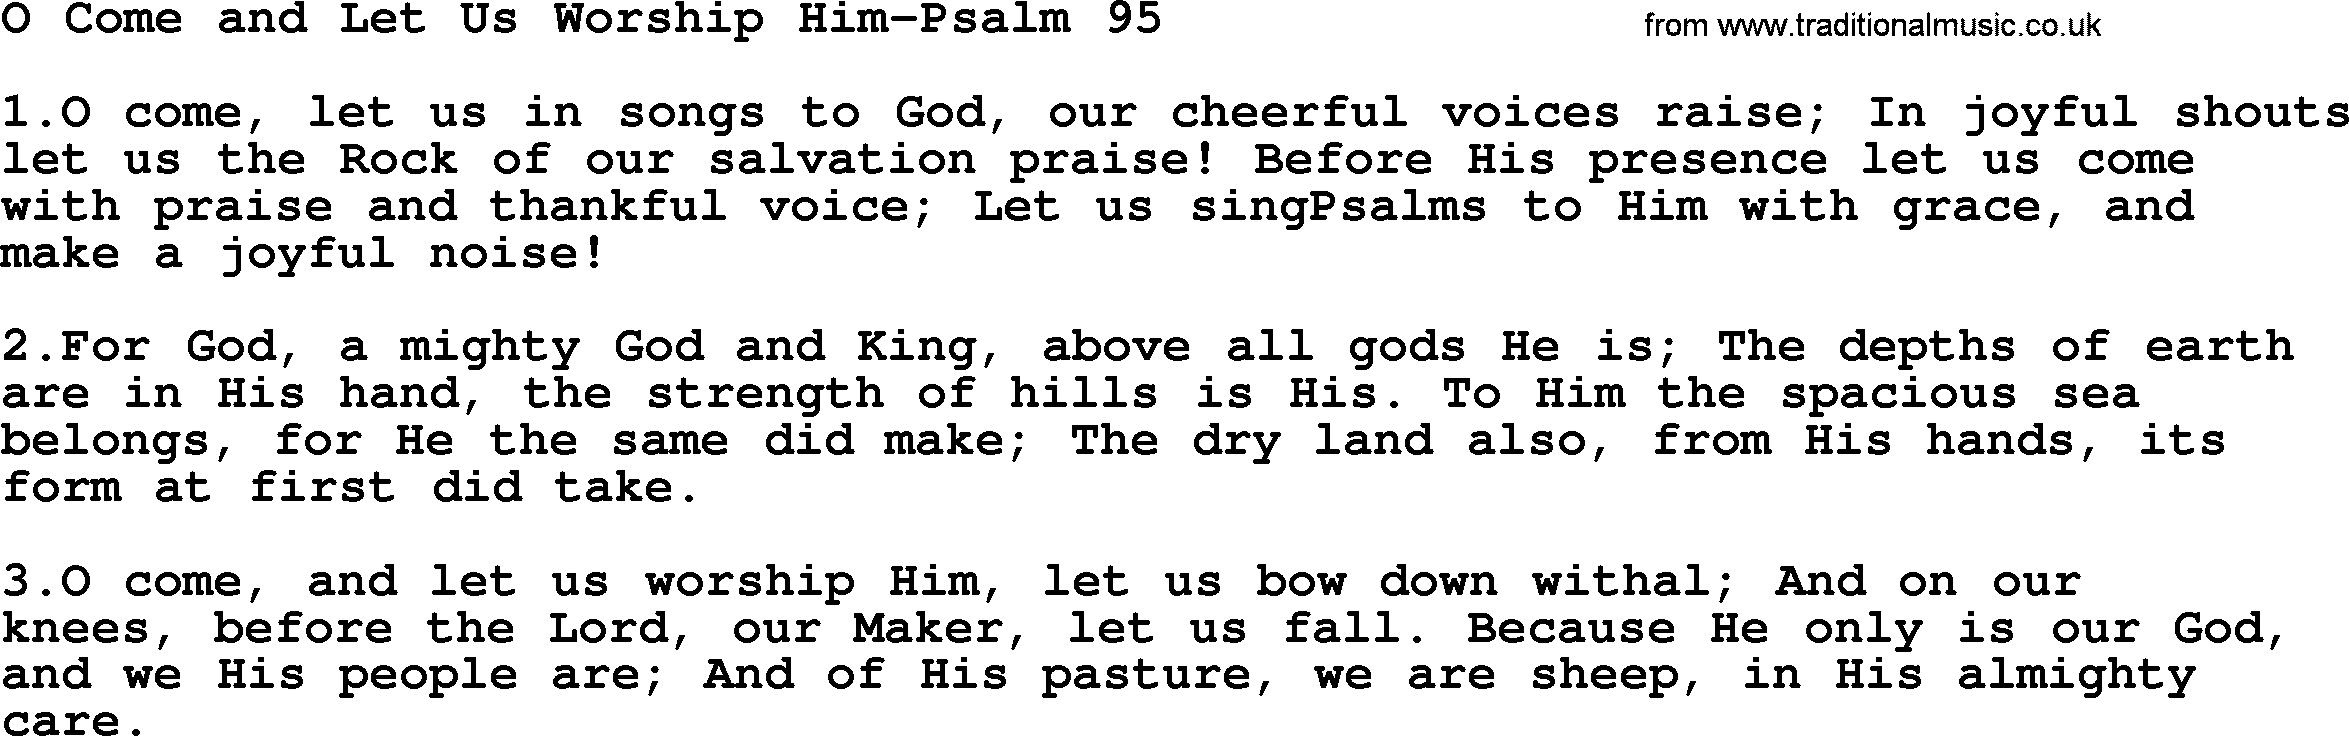 Hymns from the Psalms, Hymn: O Come And Let Us Worship Him-Psalm 95, lyrics with PDF